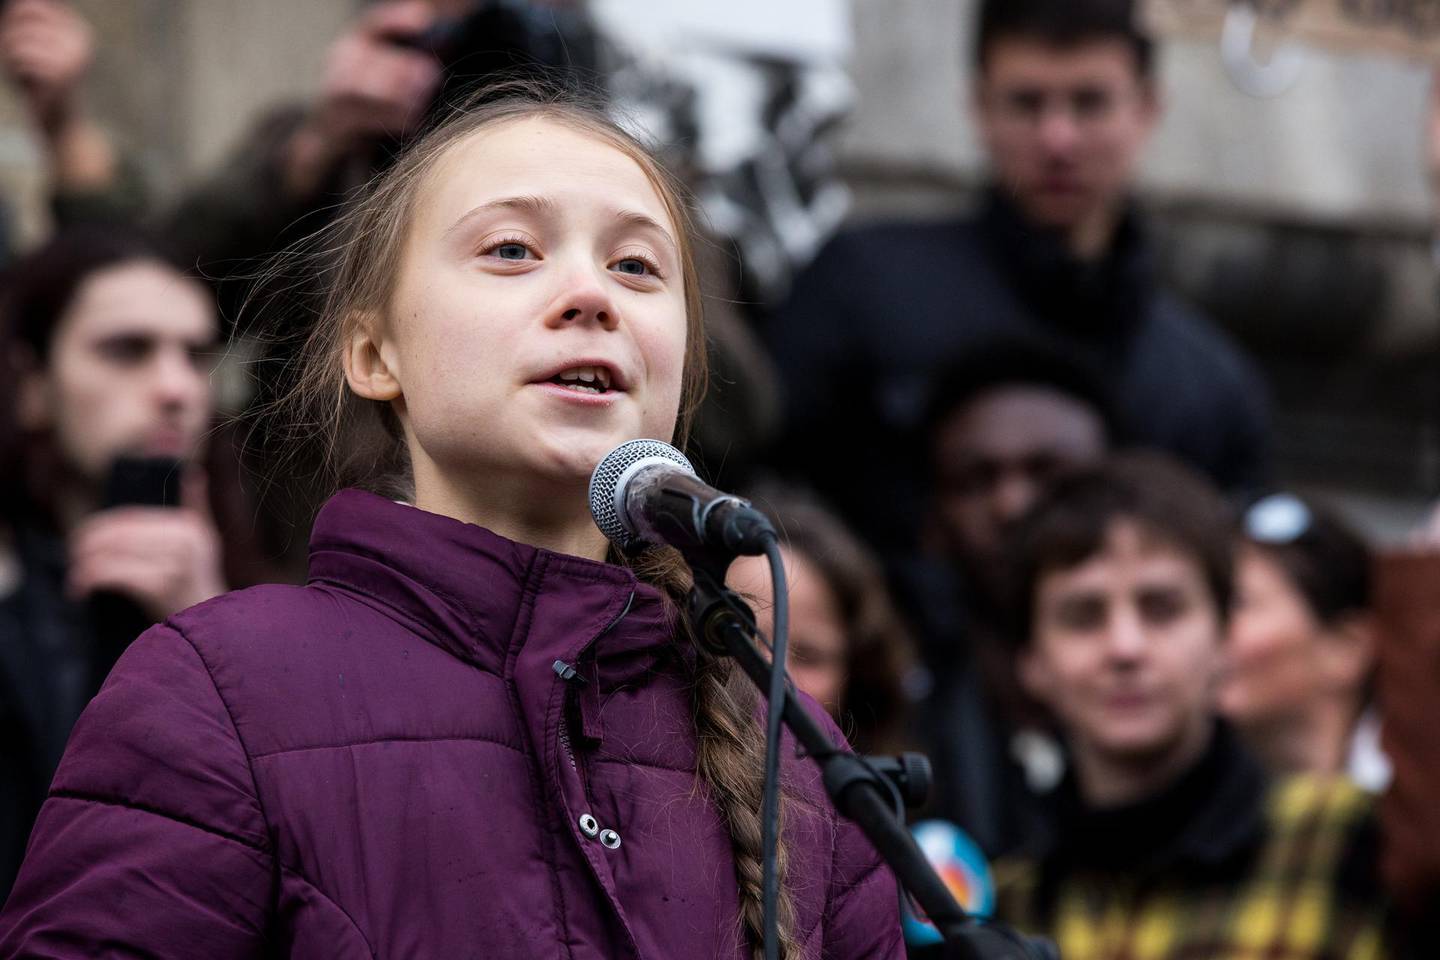 LAUSANNE, SWITZERLAND - JANUARY 17: Swedish climate activist Greta Thunberg speaks to participants at a climate change protest on January 17, 2019 in Lausanne, Switzerland. The protest is taking place ahead of the upcoming annual gathering of world leaders at the Davos World Economic Forum. (Photo by Ronald Patrick/Getty Images)